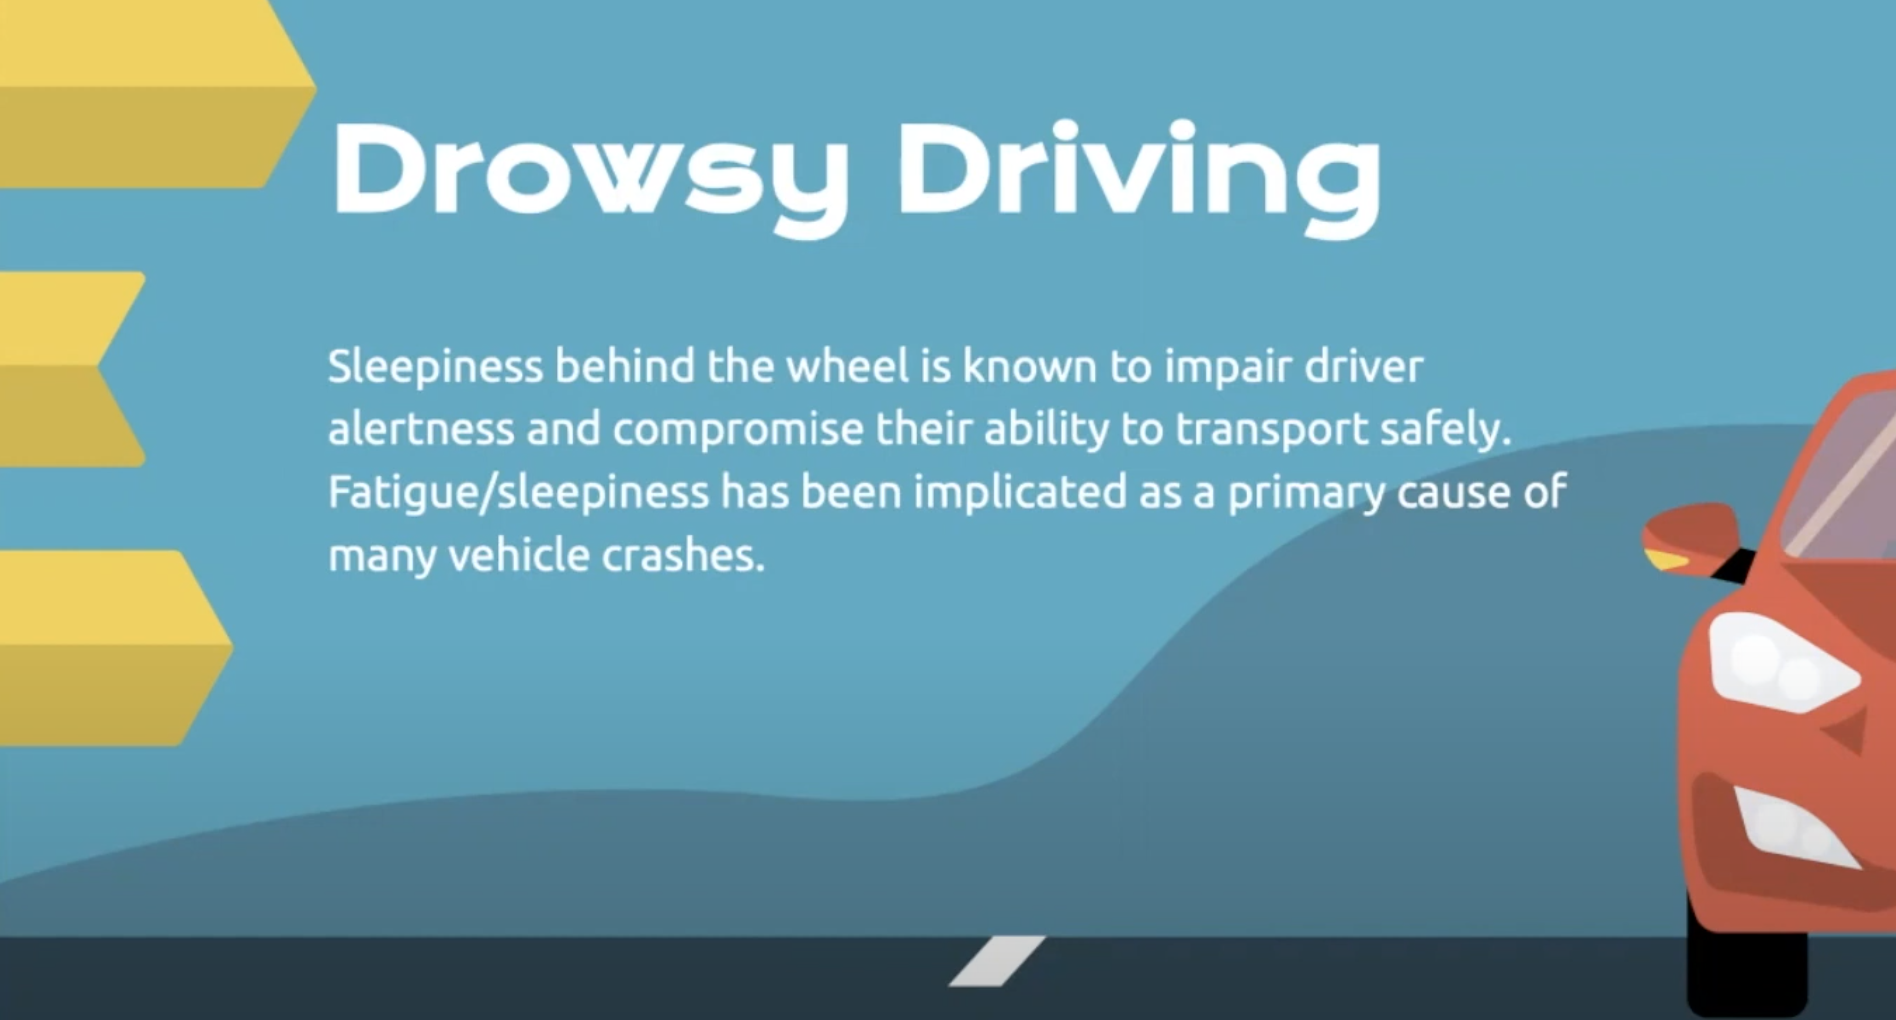 GenEd 1038 Capstone Video - Drowsy Driving